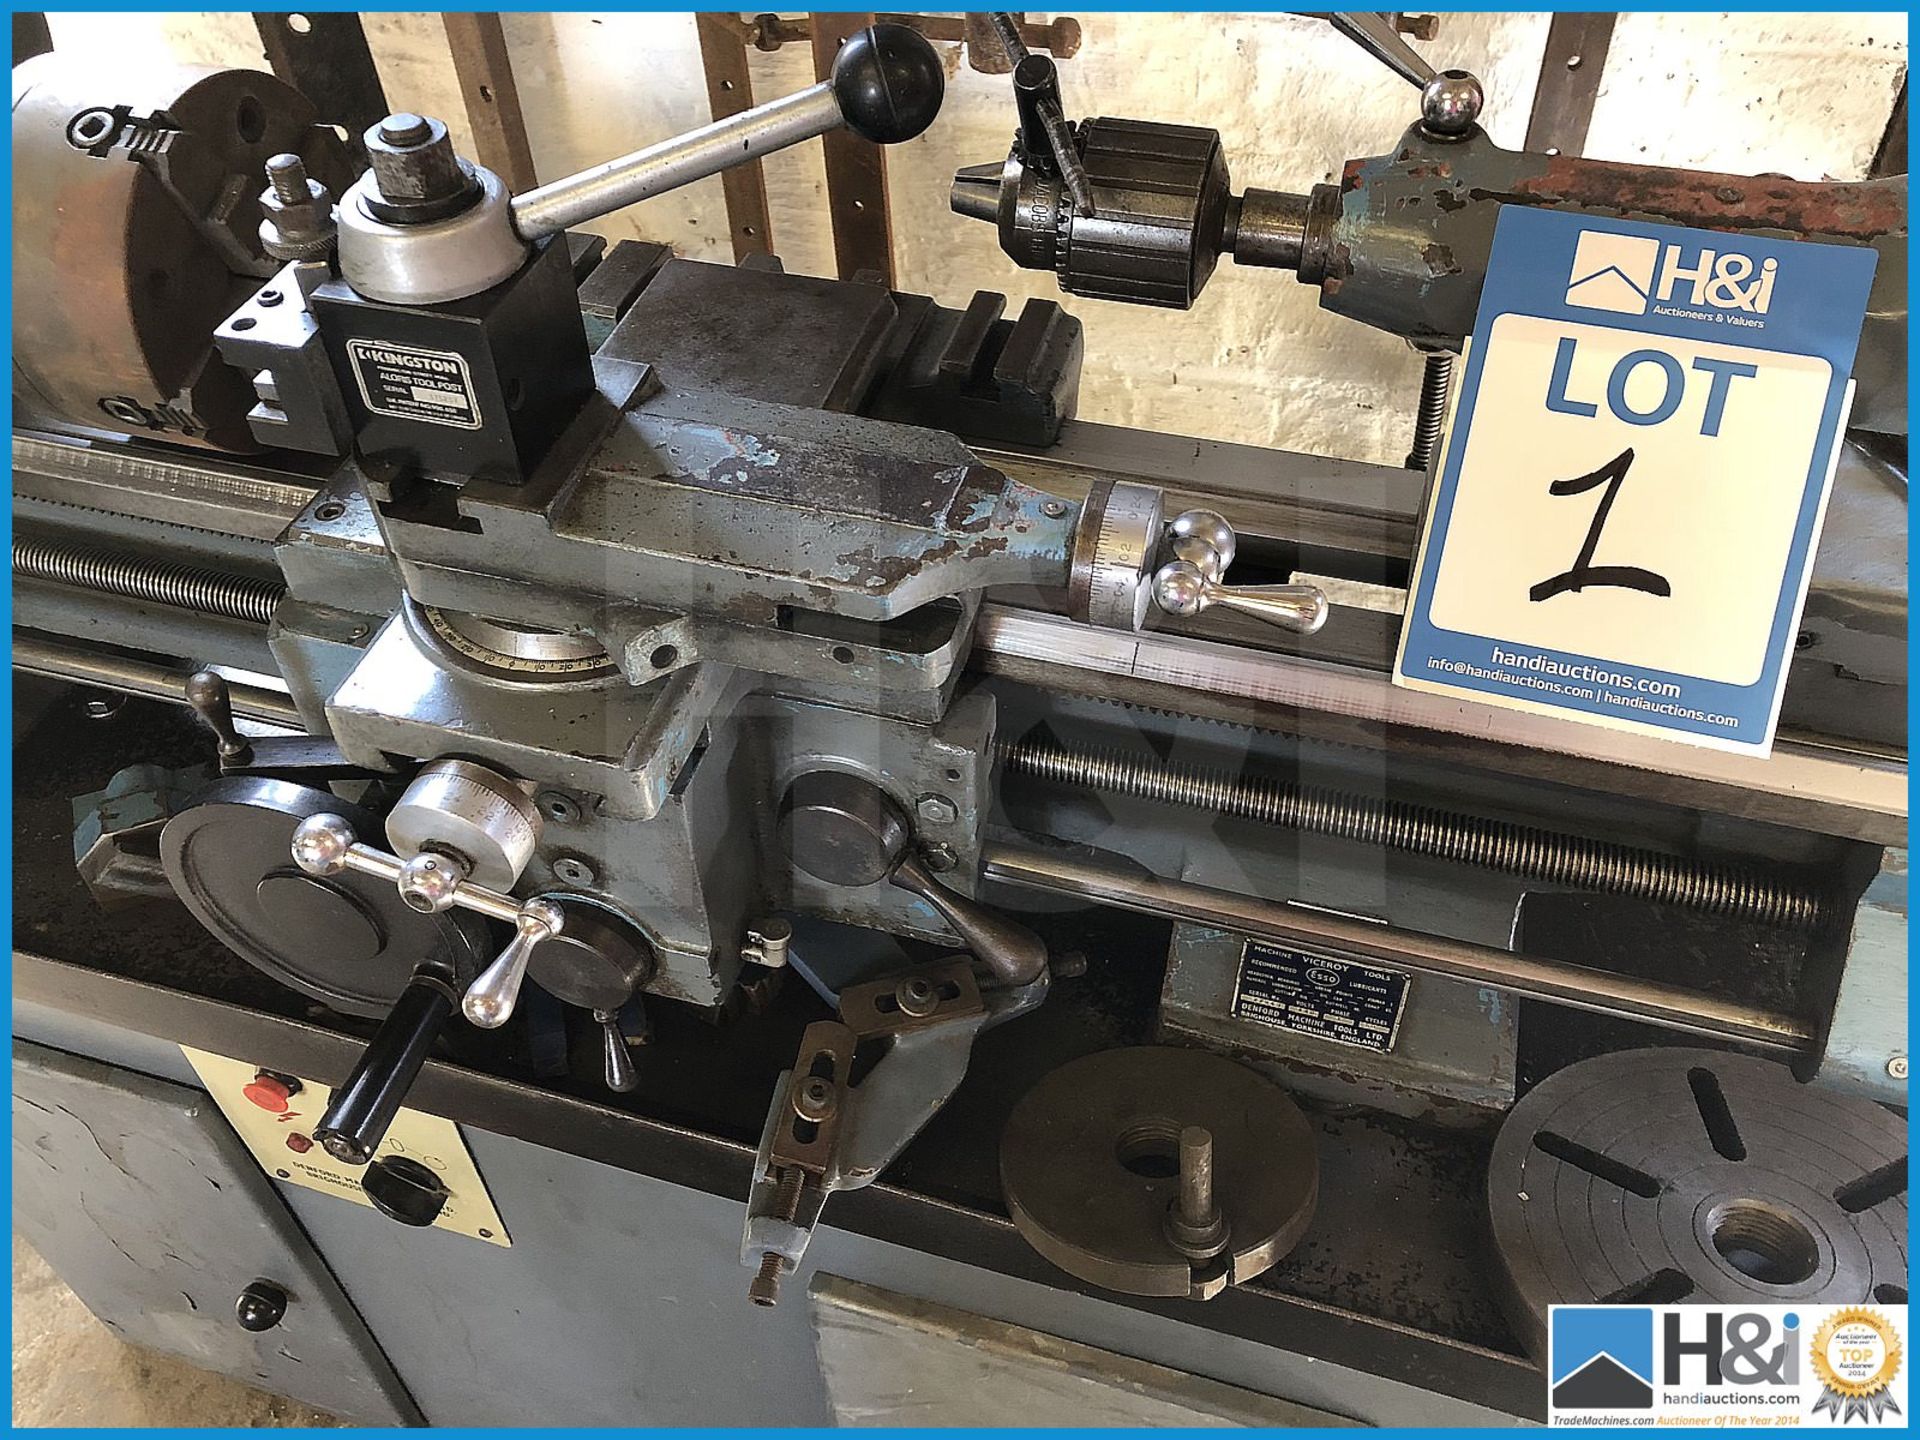 Viceroy Metric TD5 1/1G/B metalworking lathe with 2 x chucks in excellent order. 3 phase - Image 3 of 8